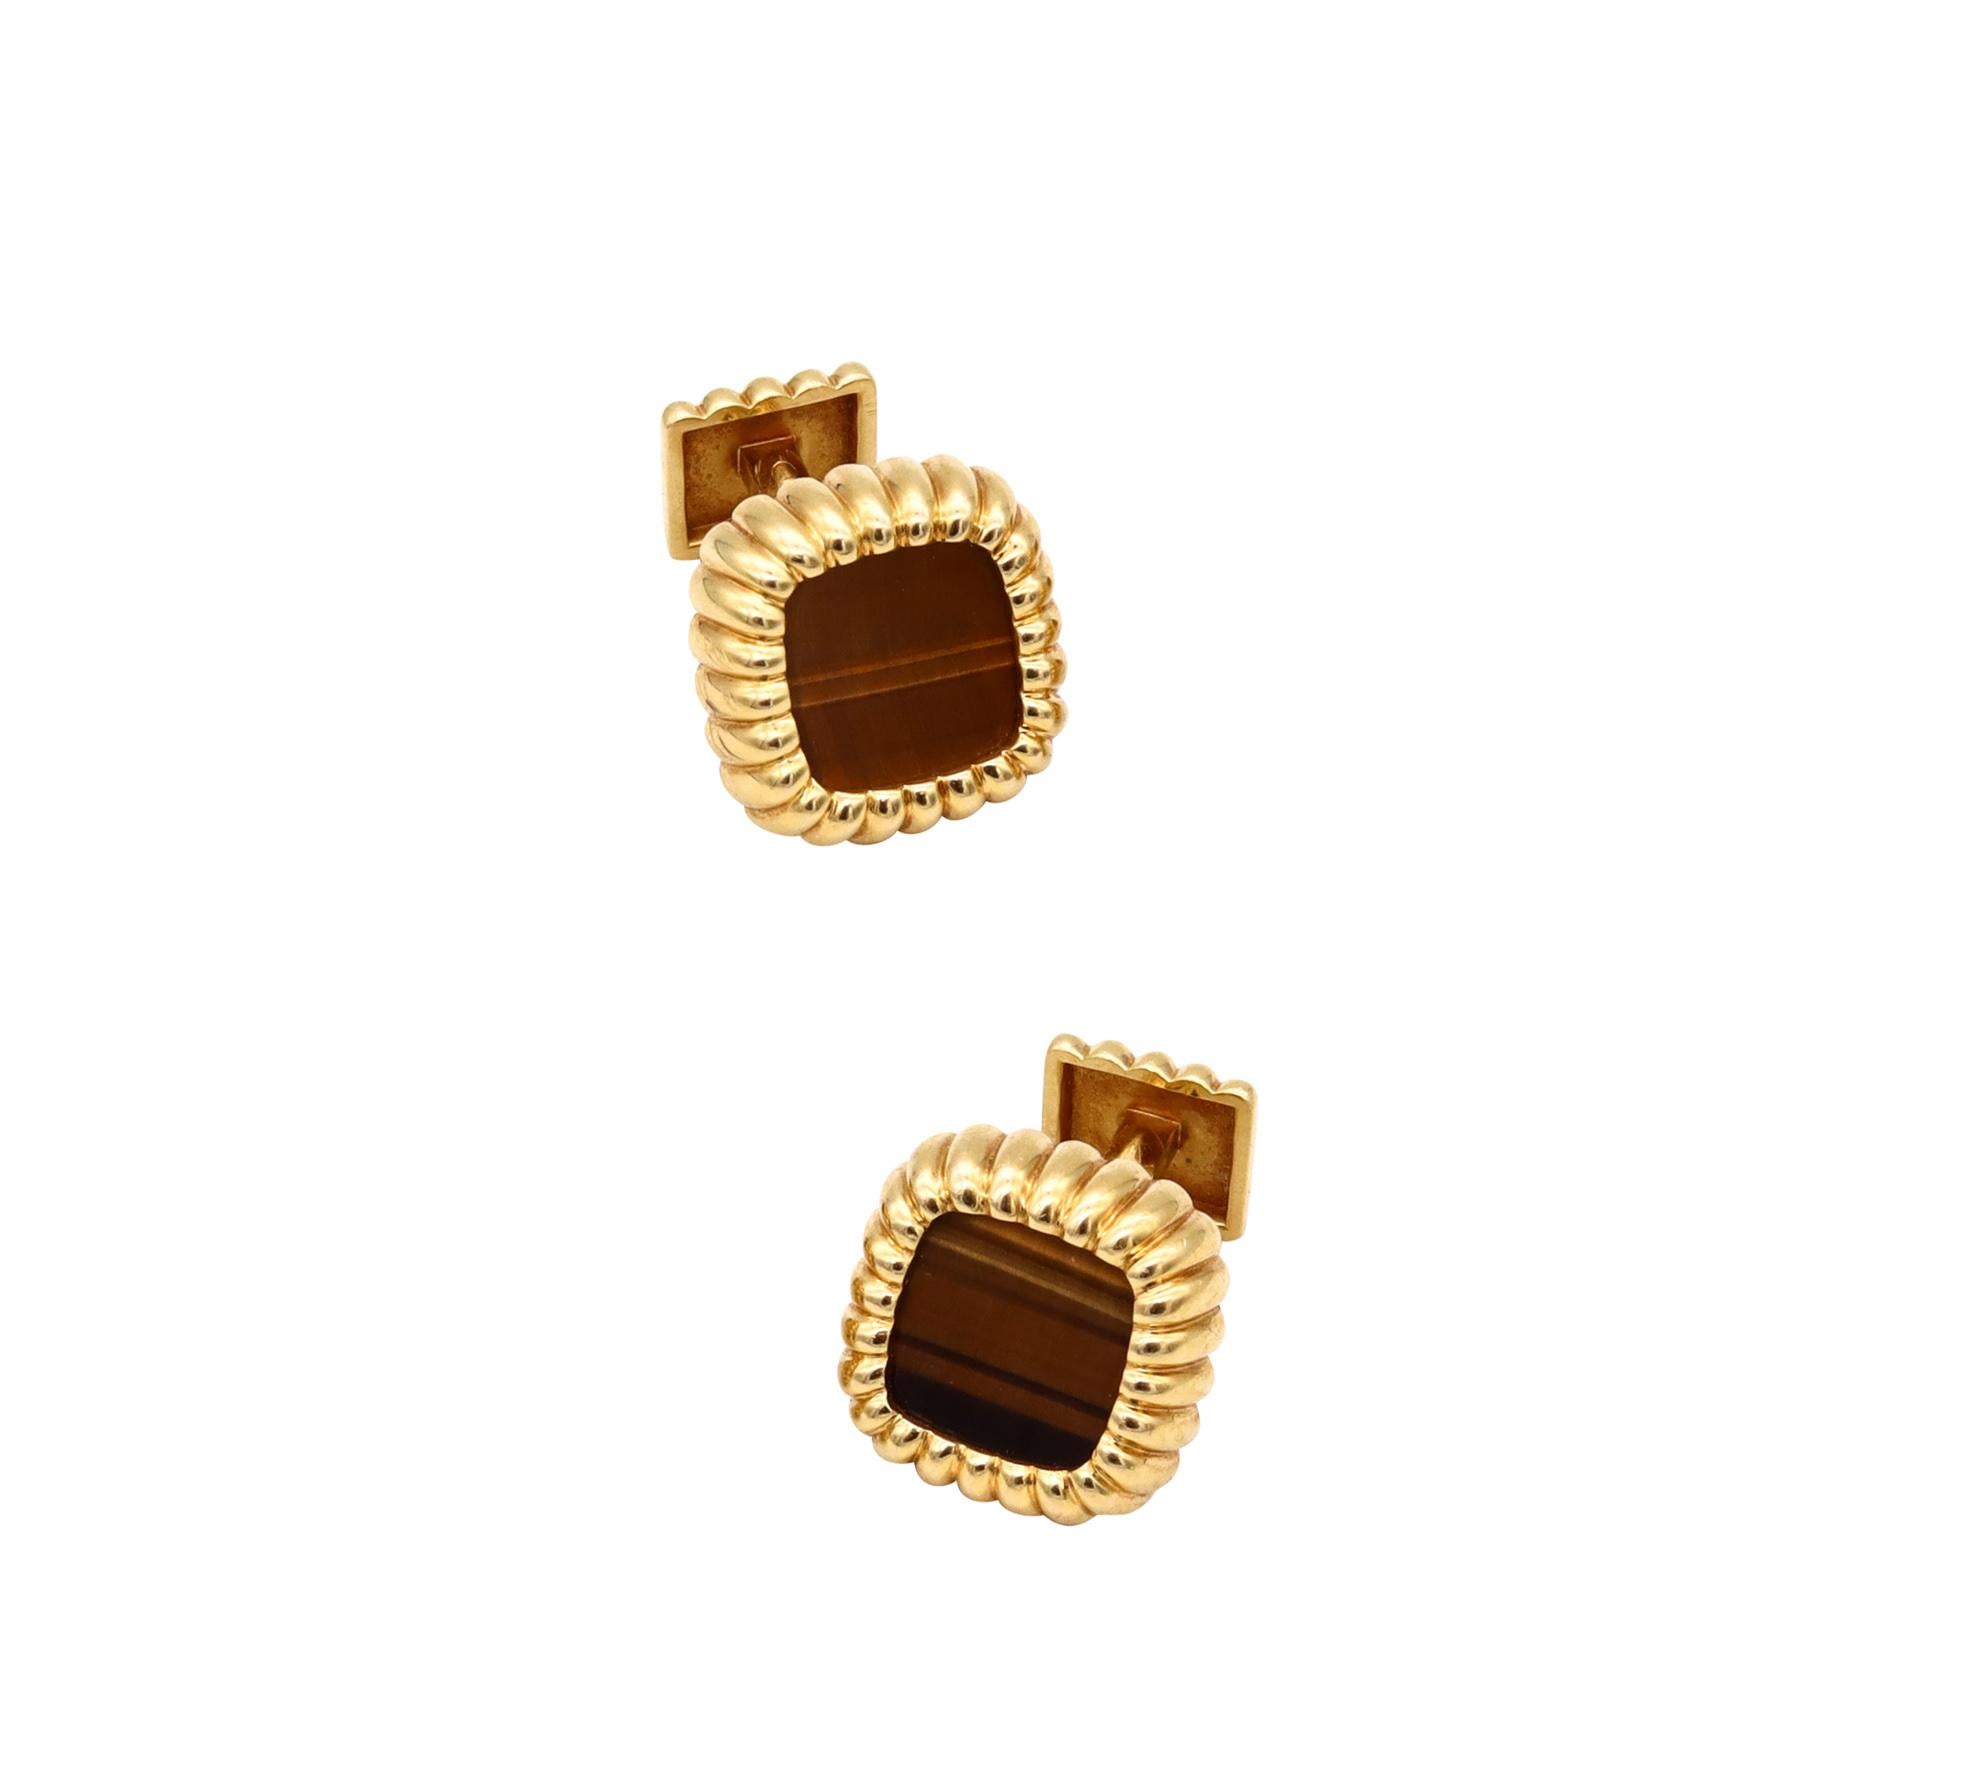 Beautiful pair of cufflinks designed by Gubelin for Piaget.

A great vintage pair created by Gubelin in Zurich Switzerland, around the 1970's. They was carefully crafted in solid yellow gold of 18 karats and finished with high polish. The design is